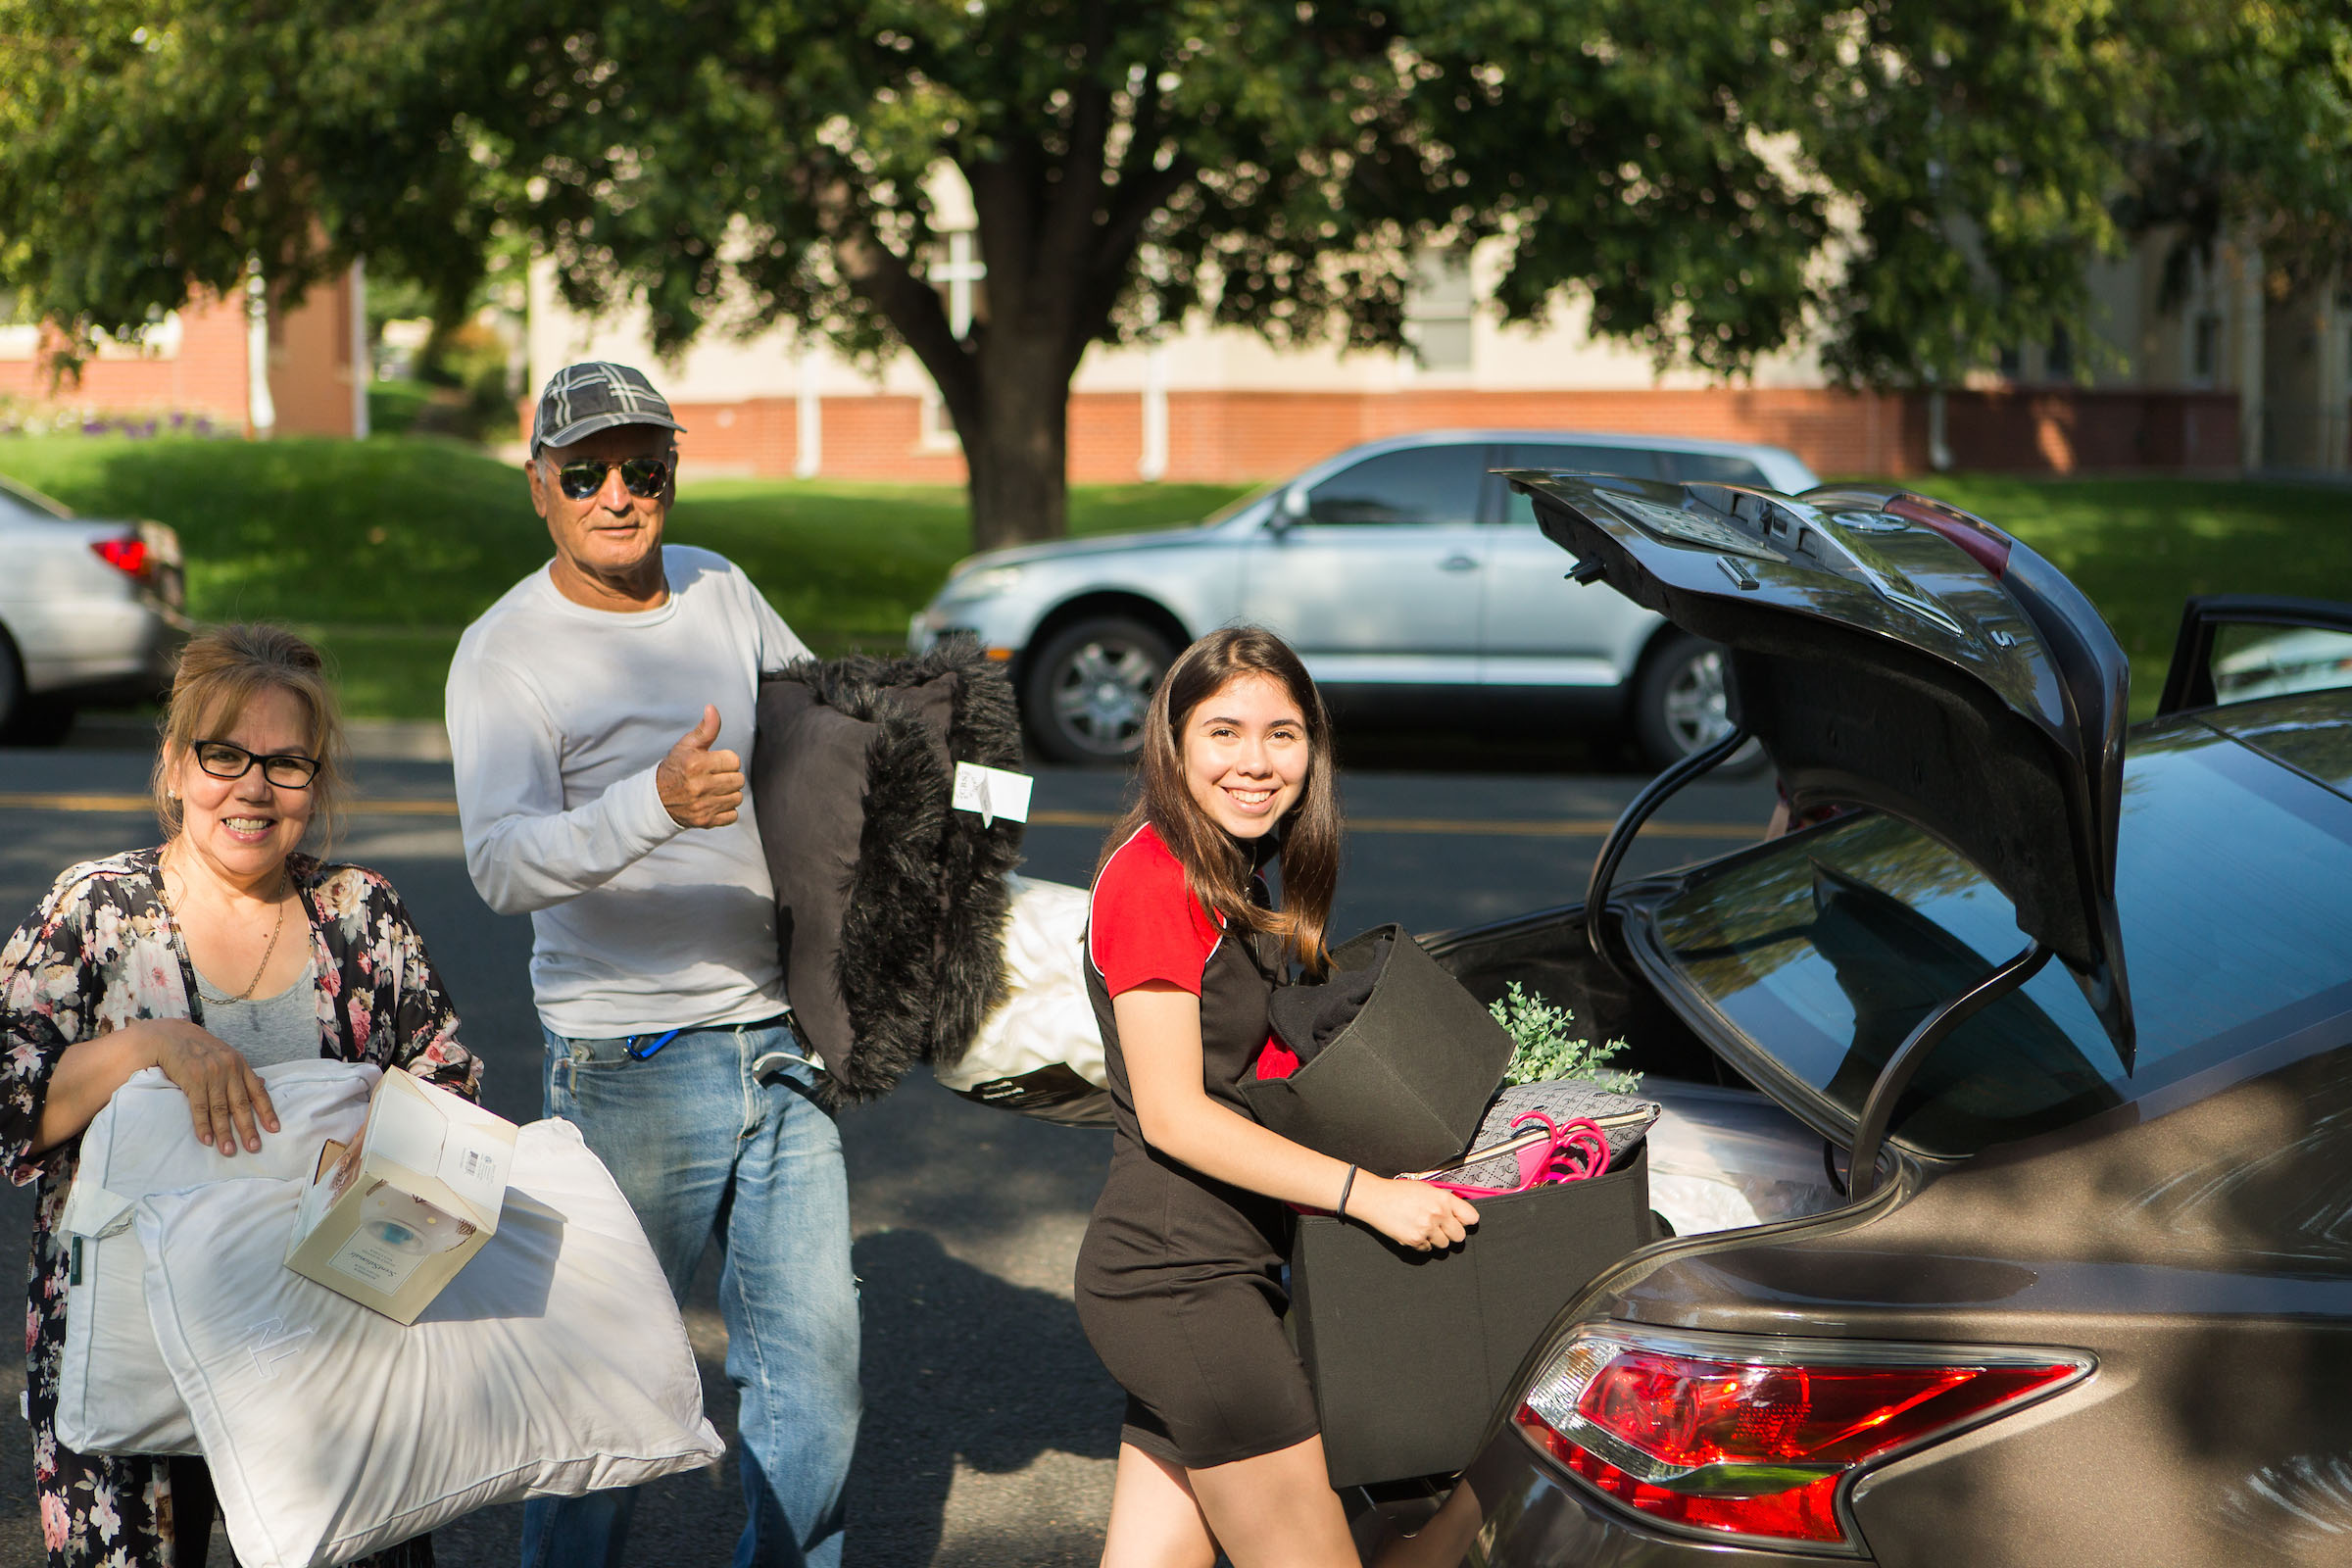 People pose while getting luggage out of the trunk of their car.